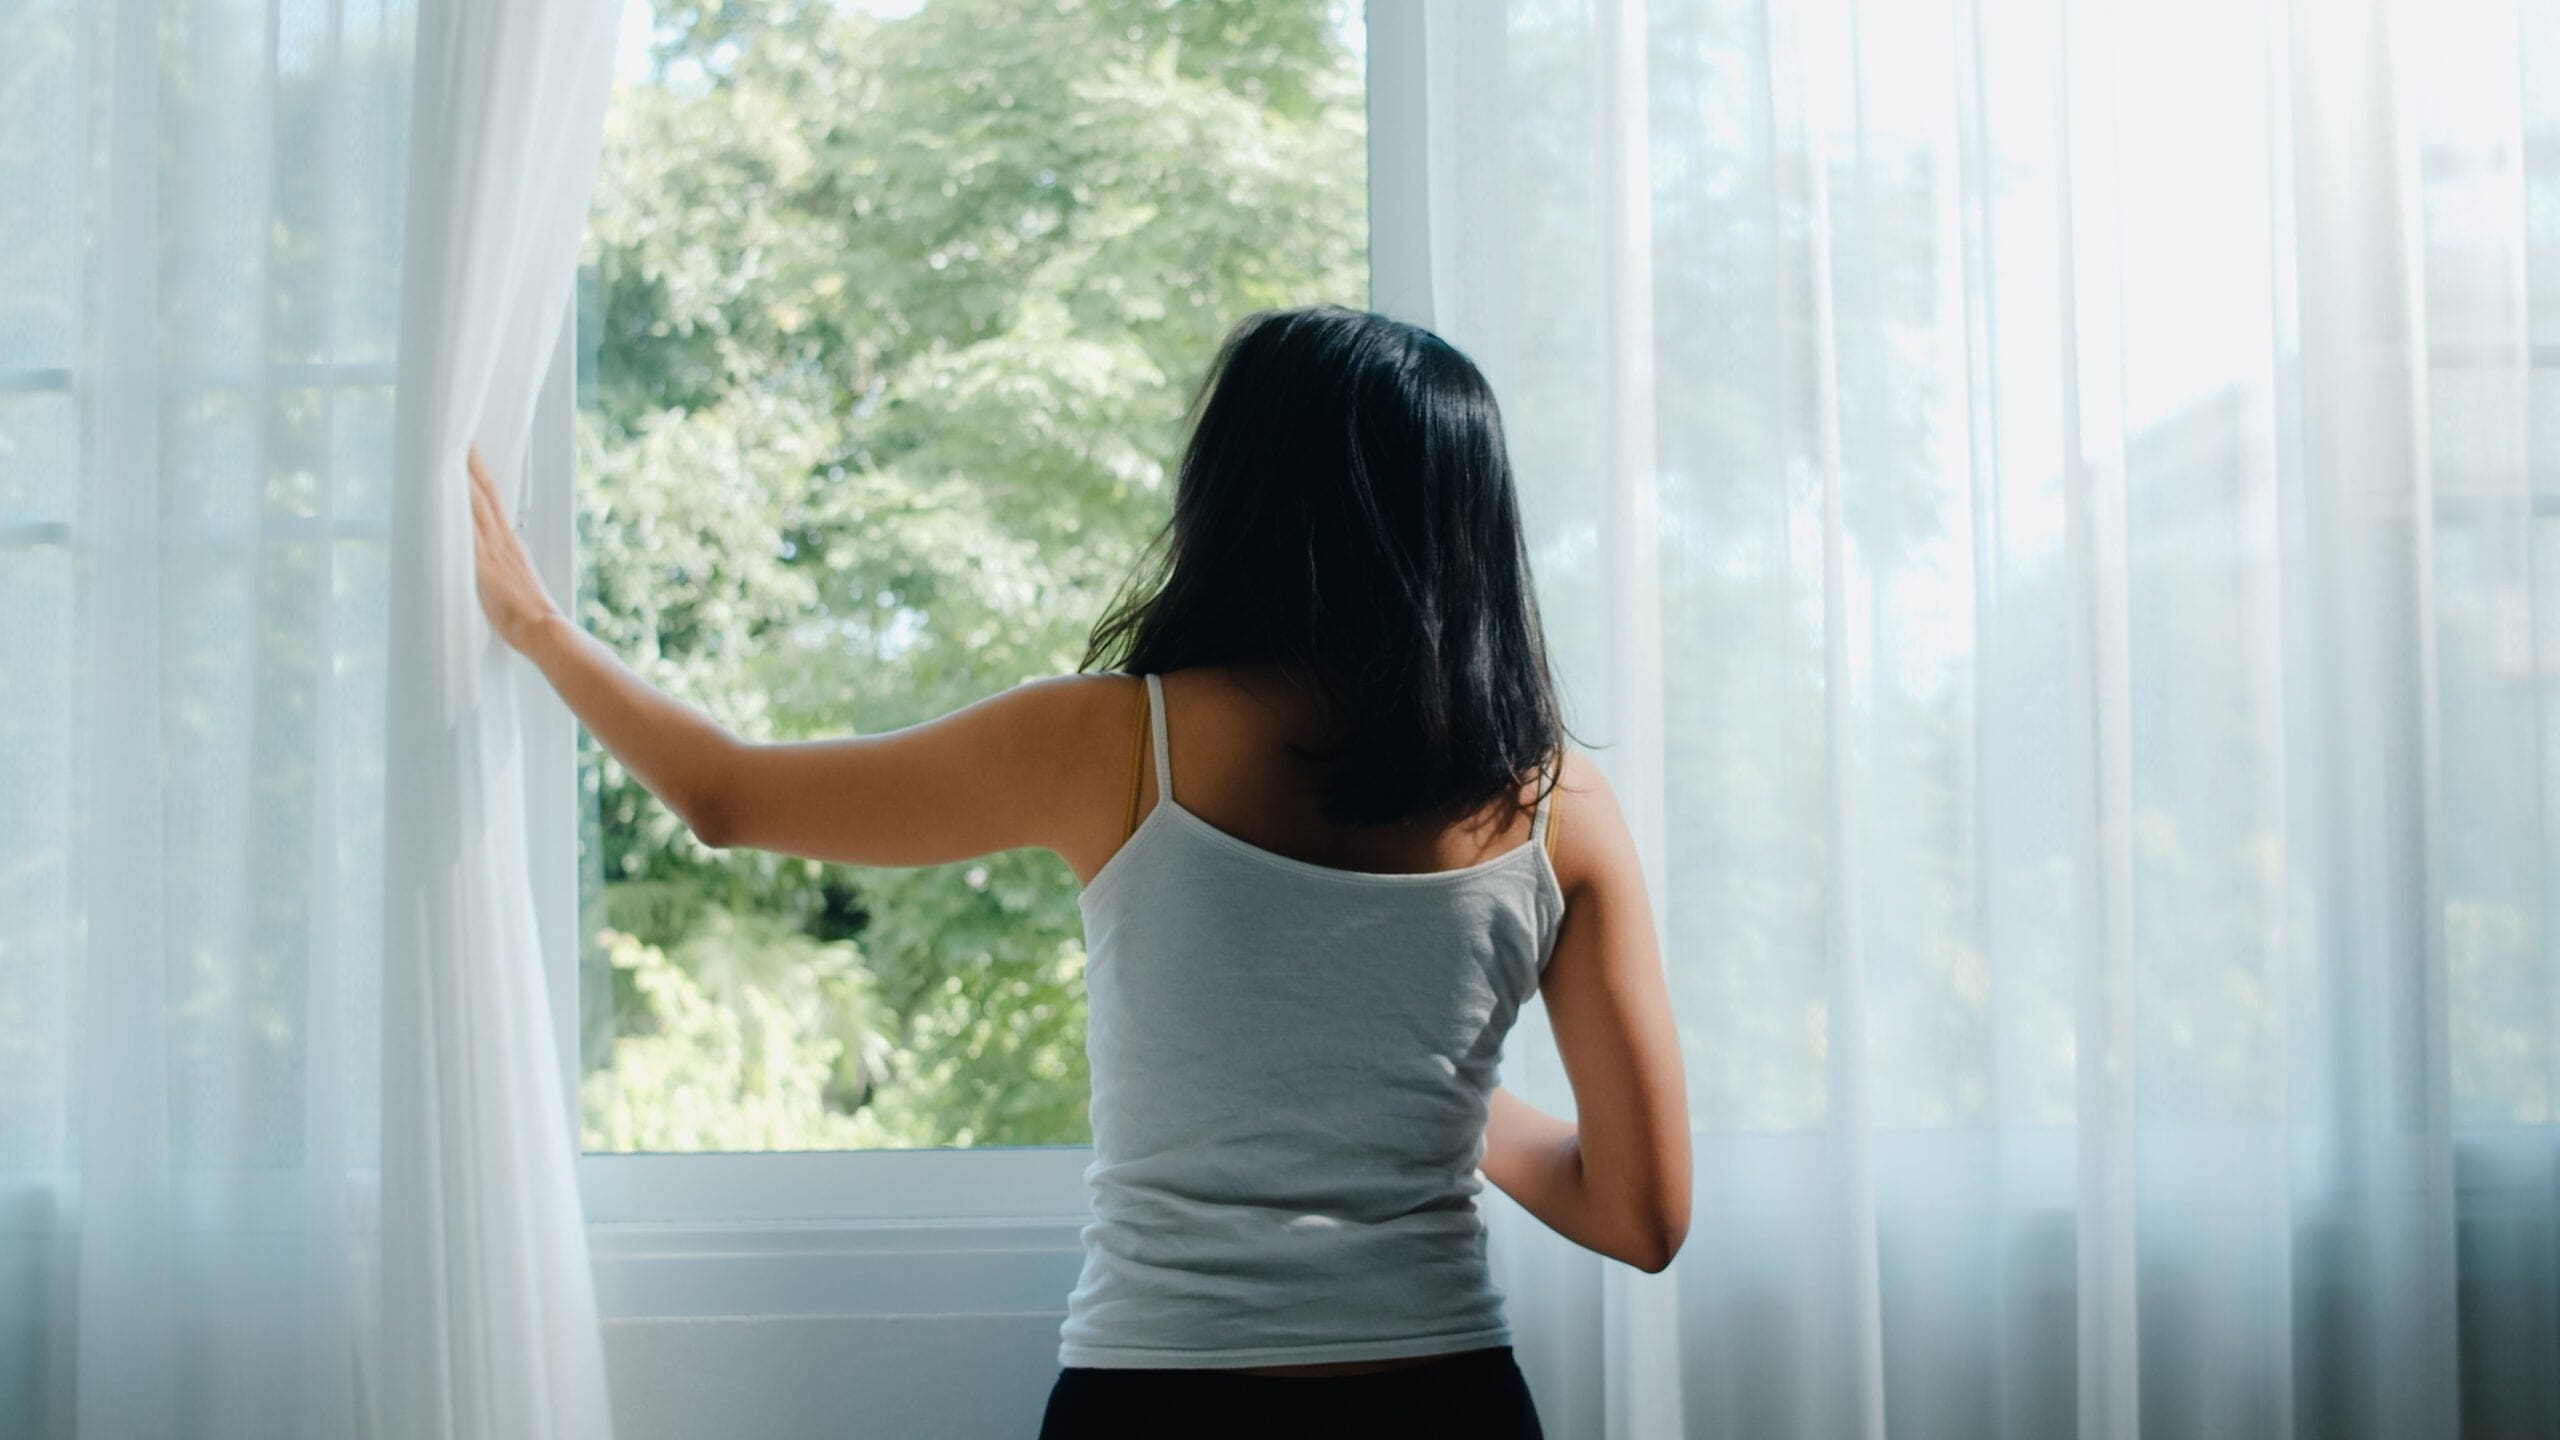 Woman opening up a window for fresh air scent